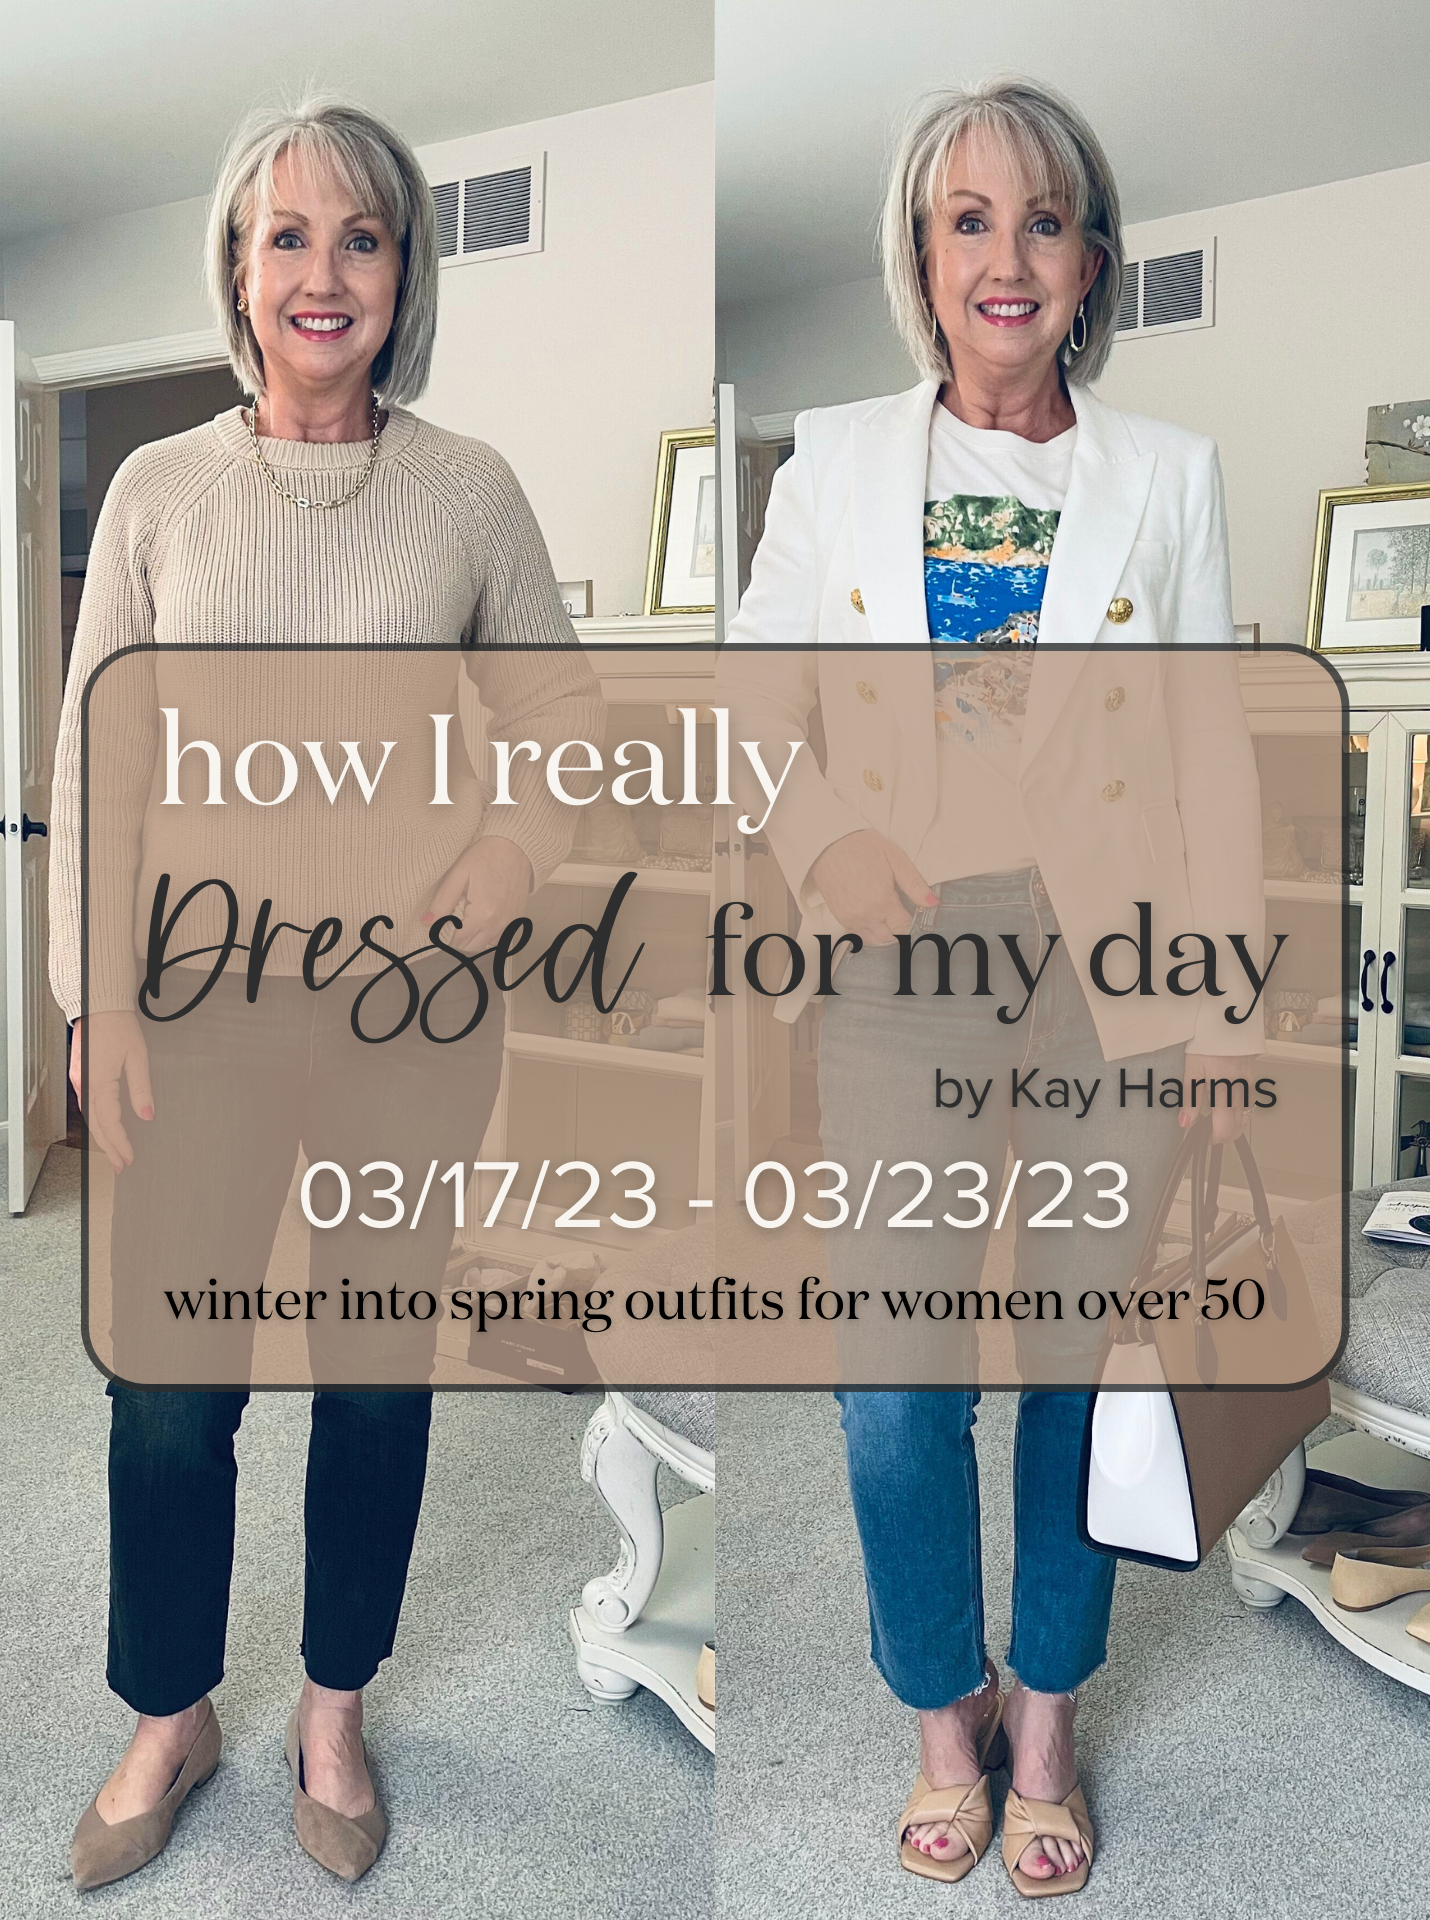 This Week's Daily Outfits - Dressed for My Day